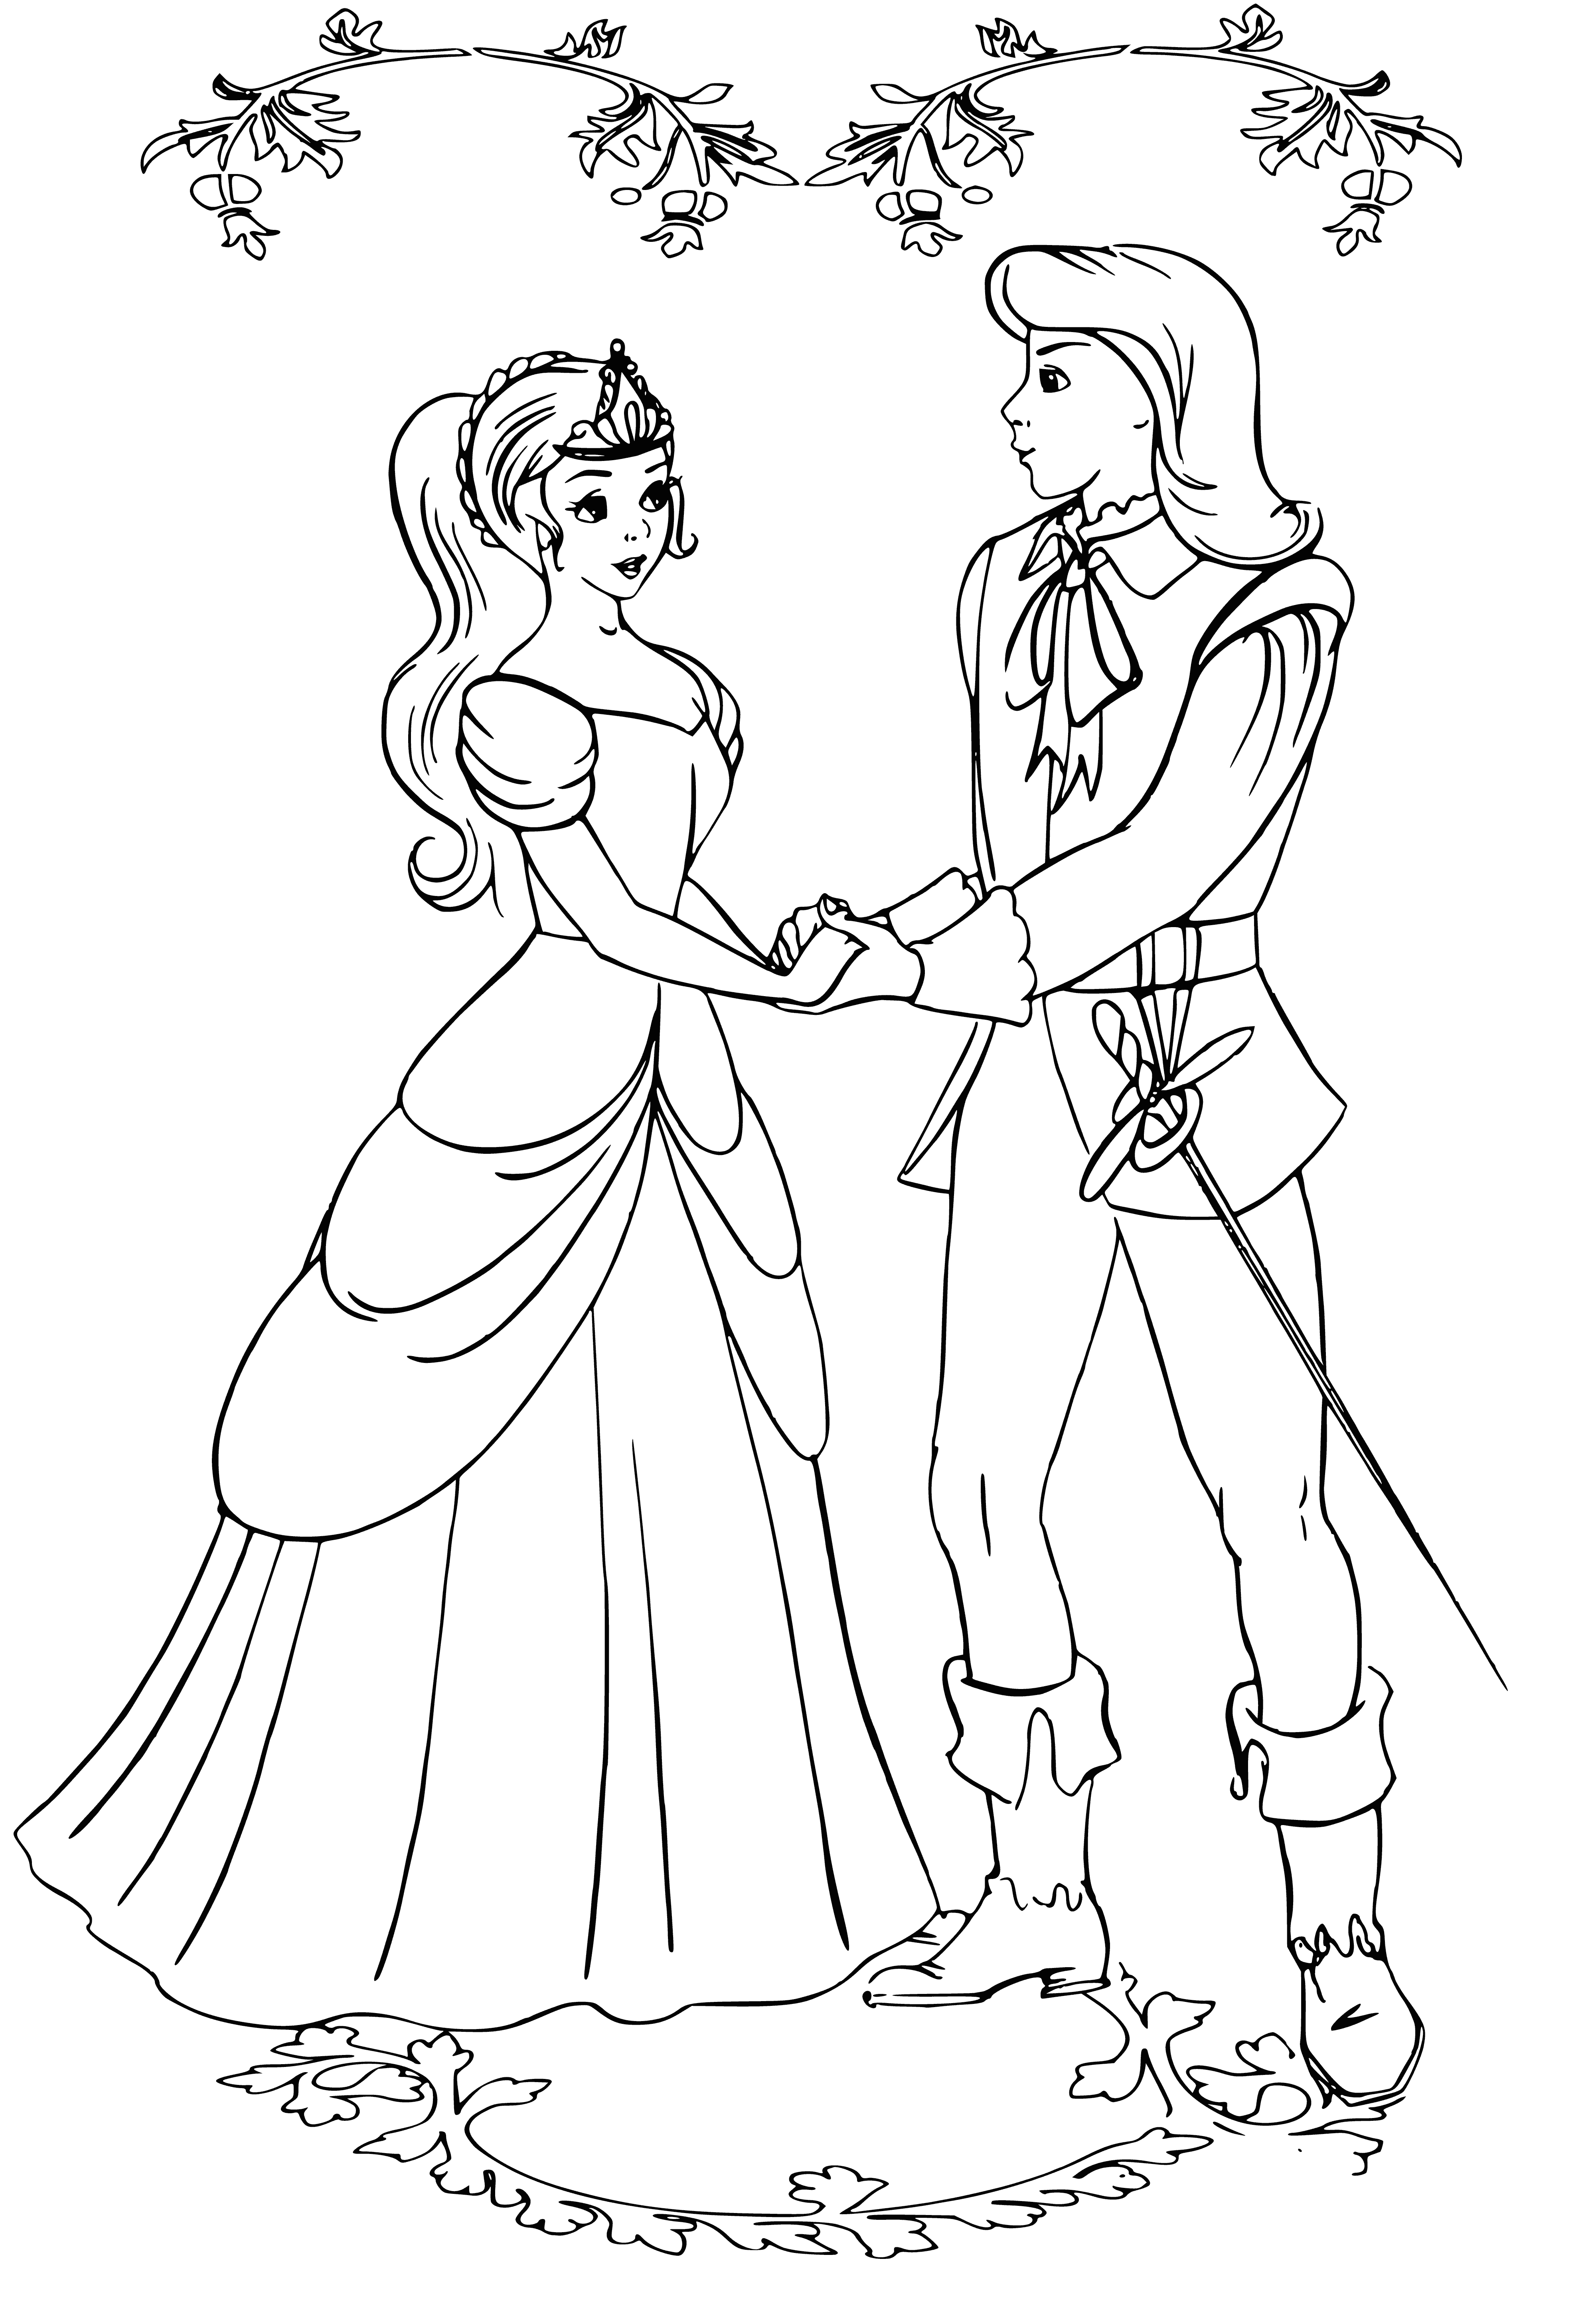 coloring page: A young princess in a glittery pink dress, with a tiara and fan in hand.